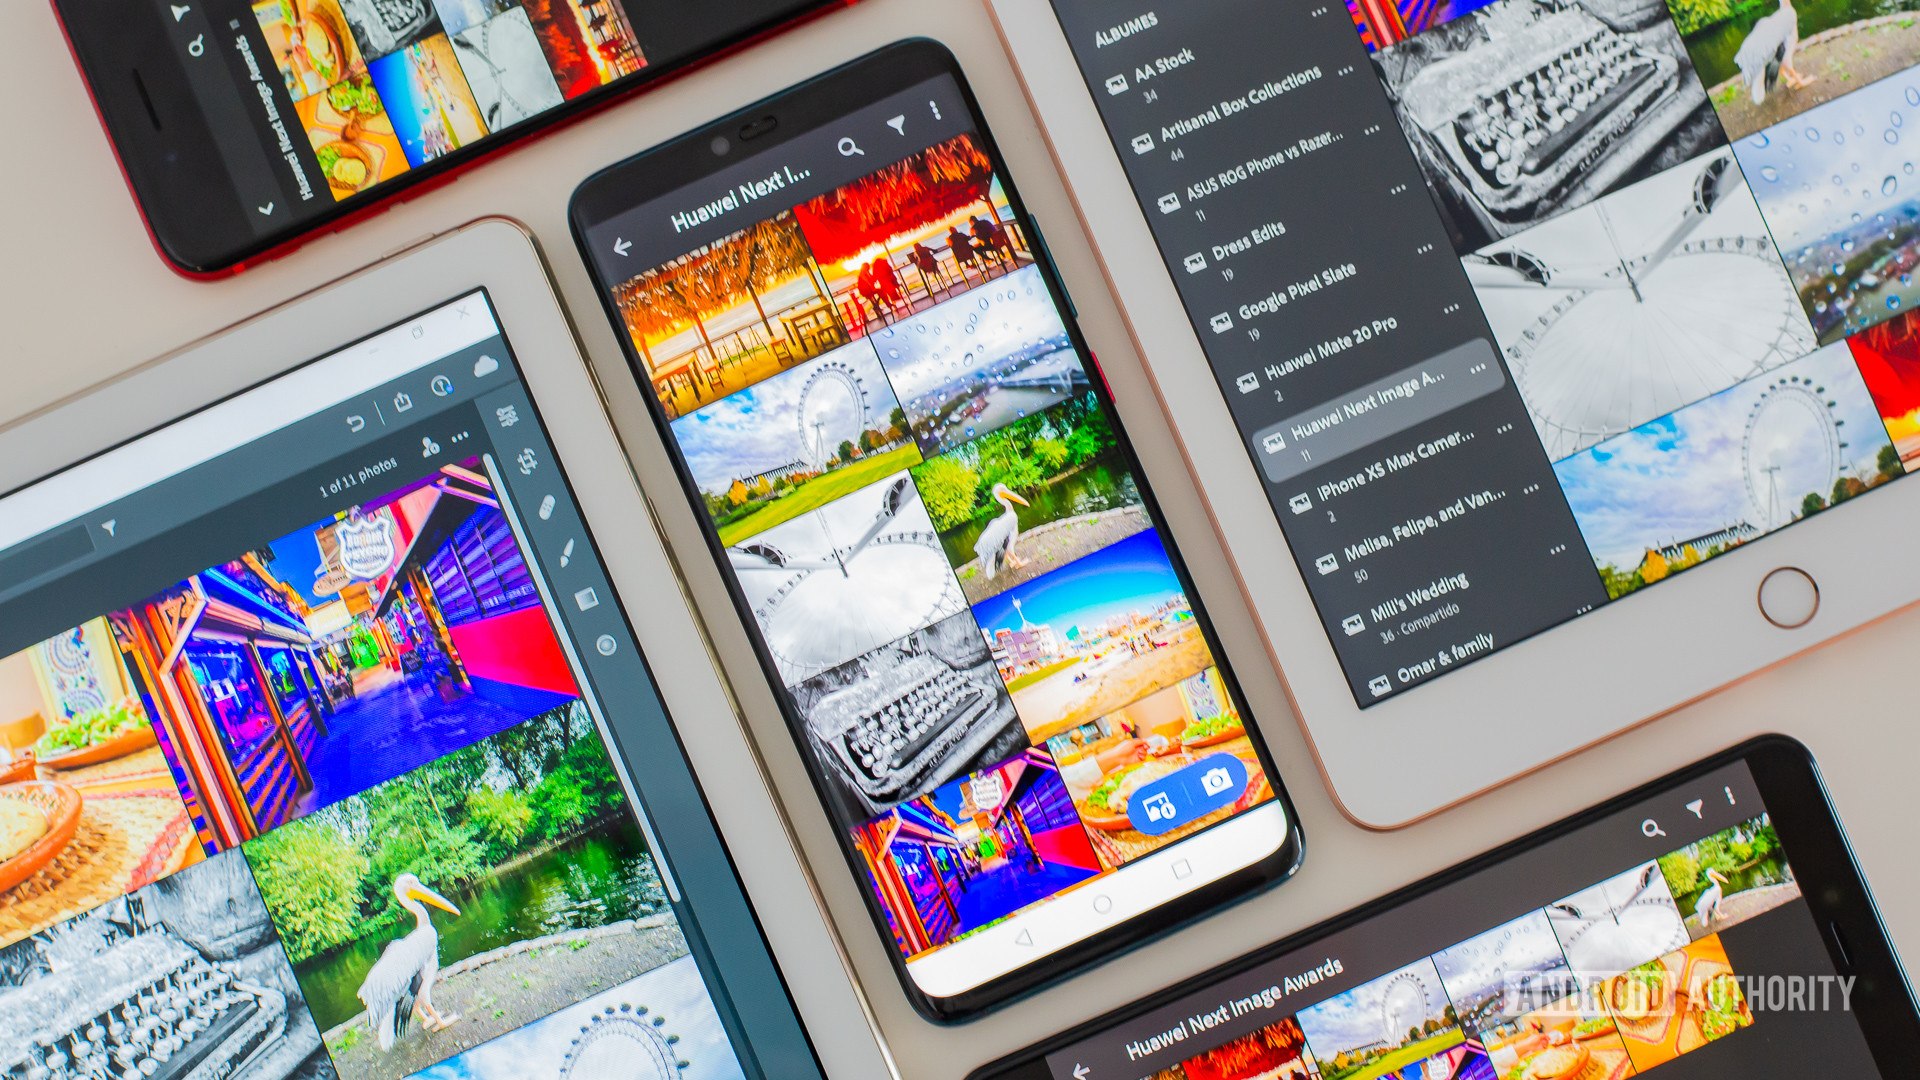 Adobe Lightroom mobile open in many devices - Photography